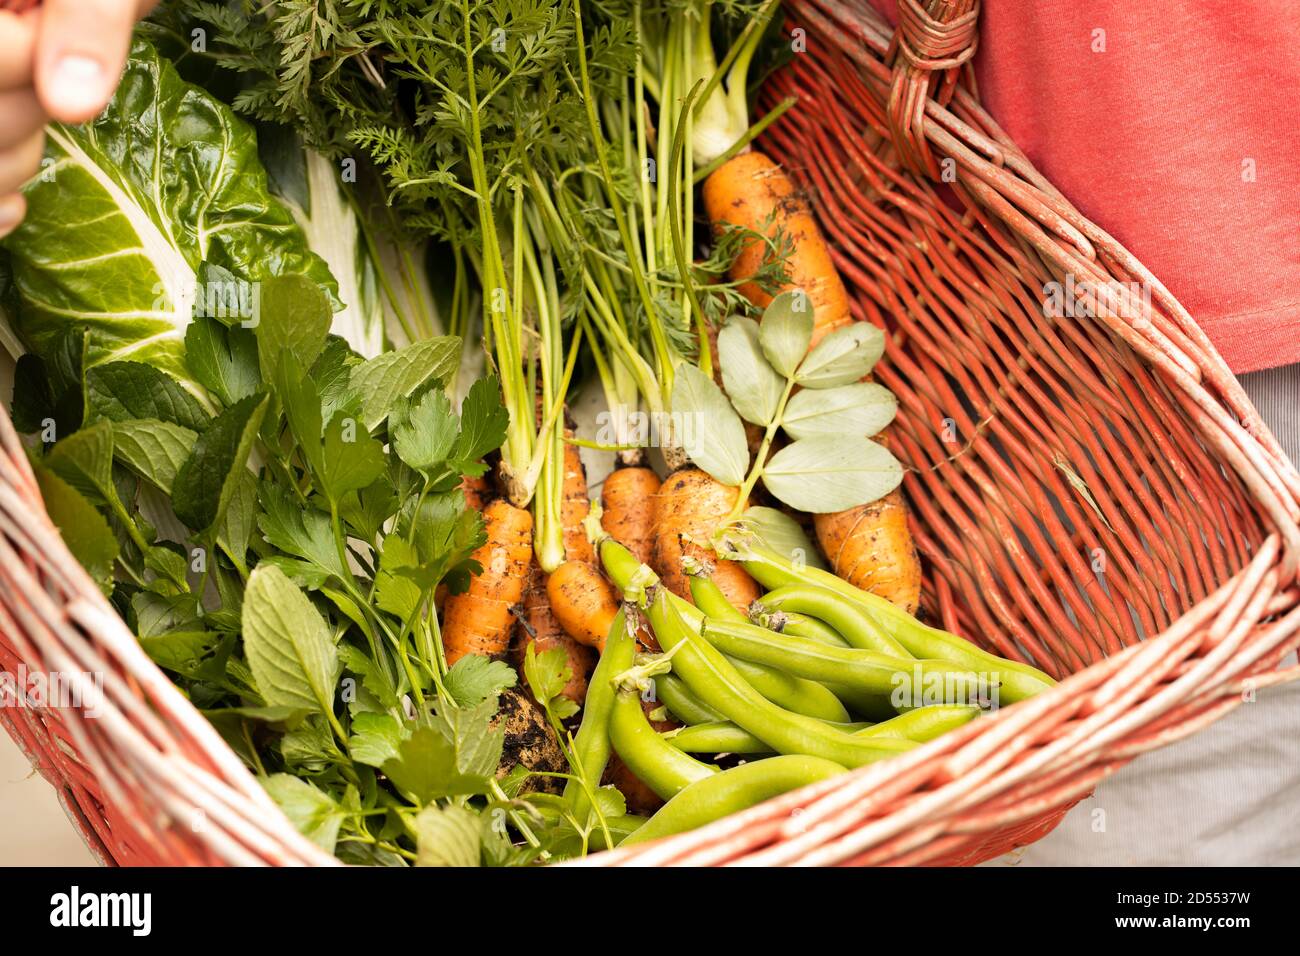 red basket with fresh picked vegetables in it Stock Photo